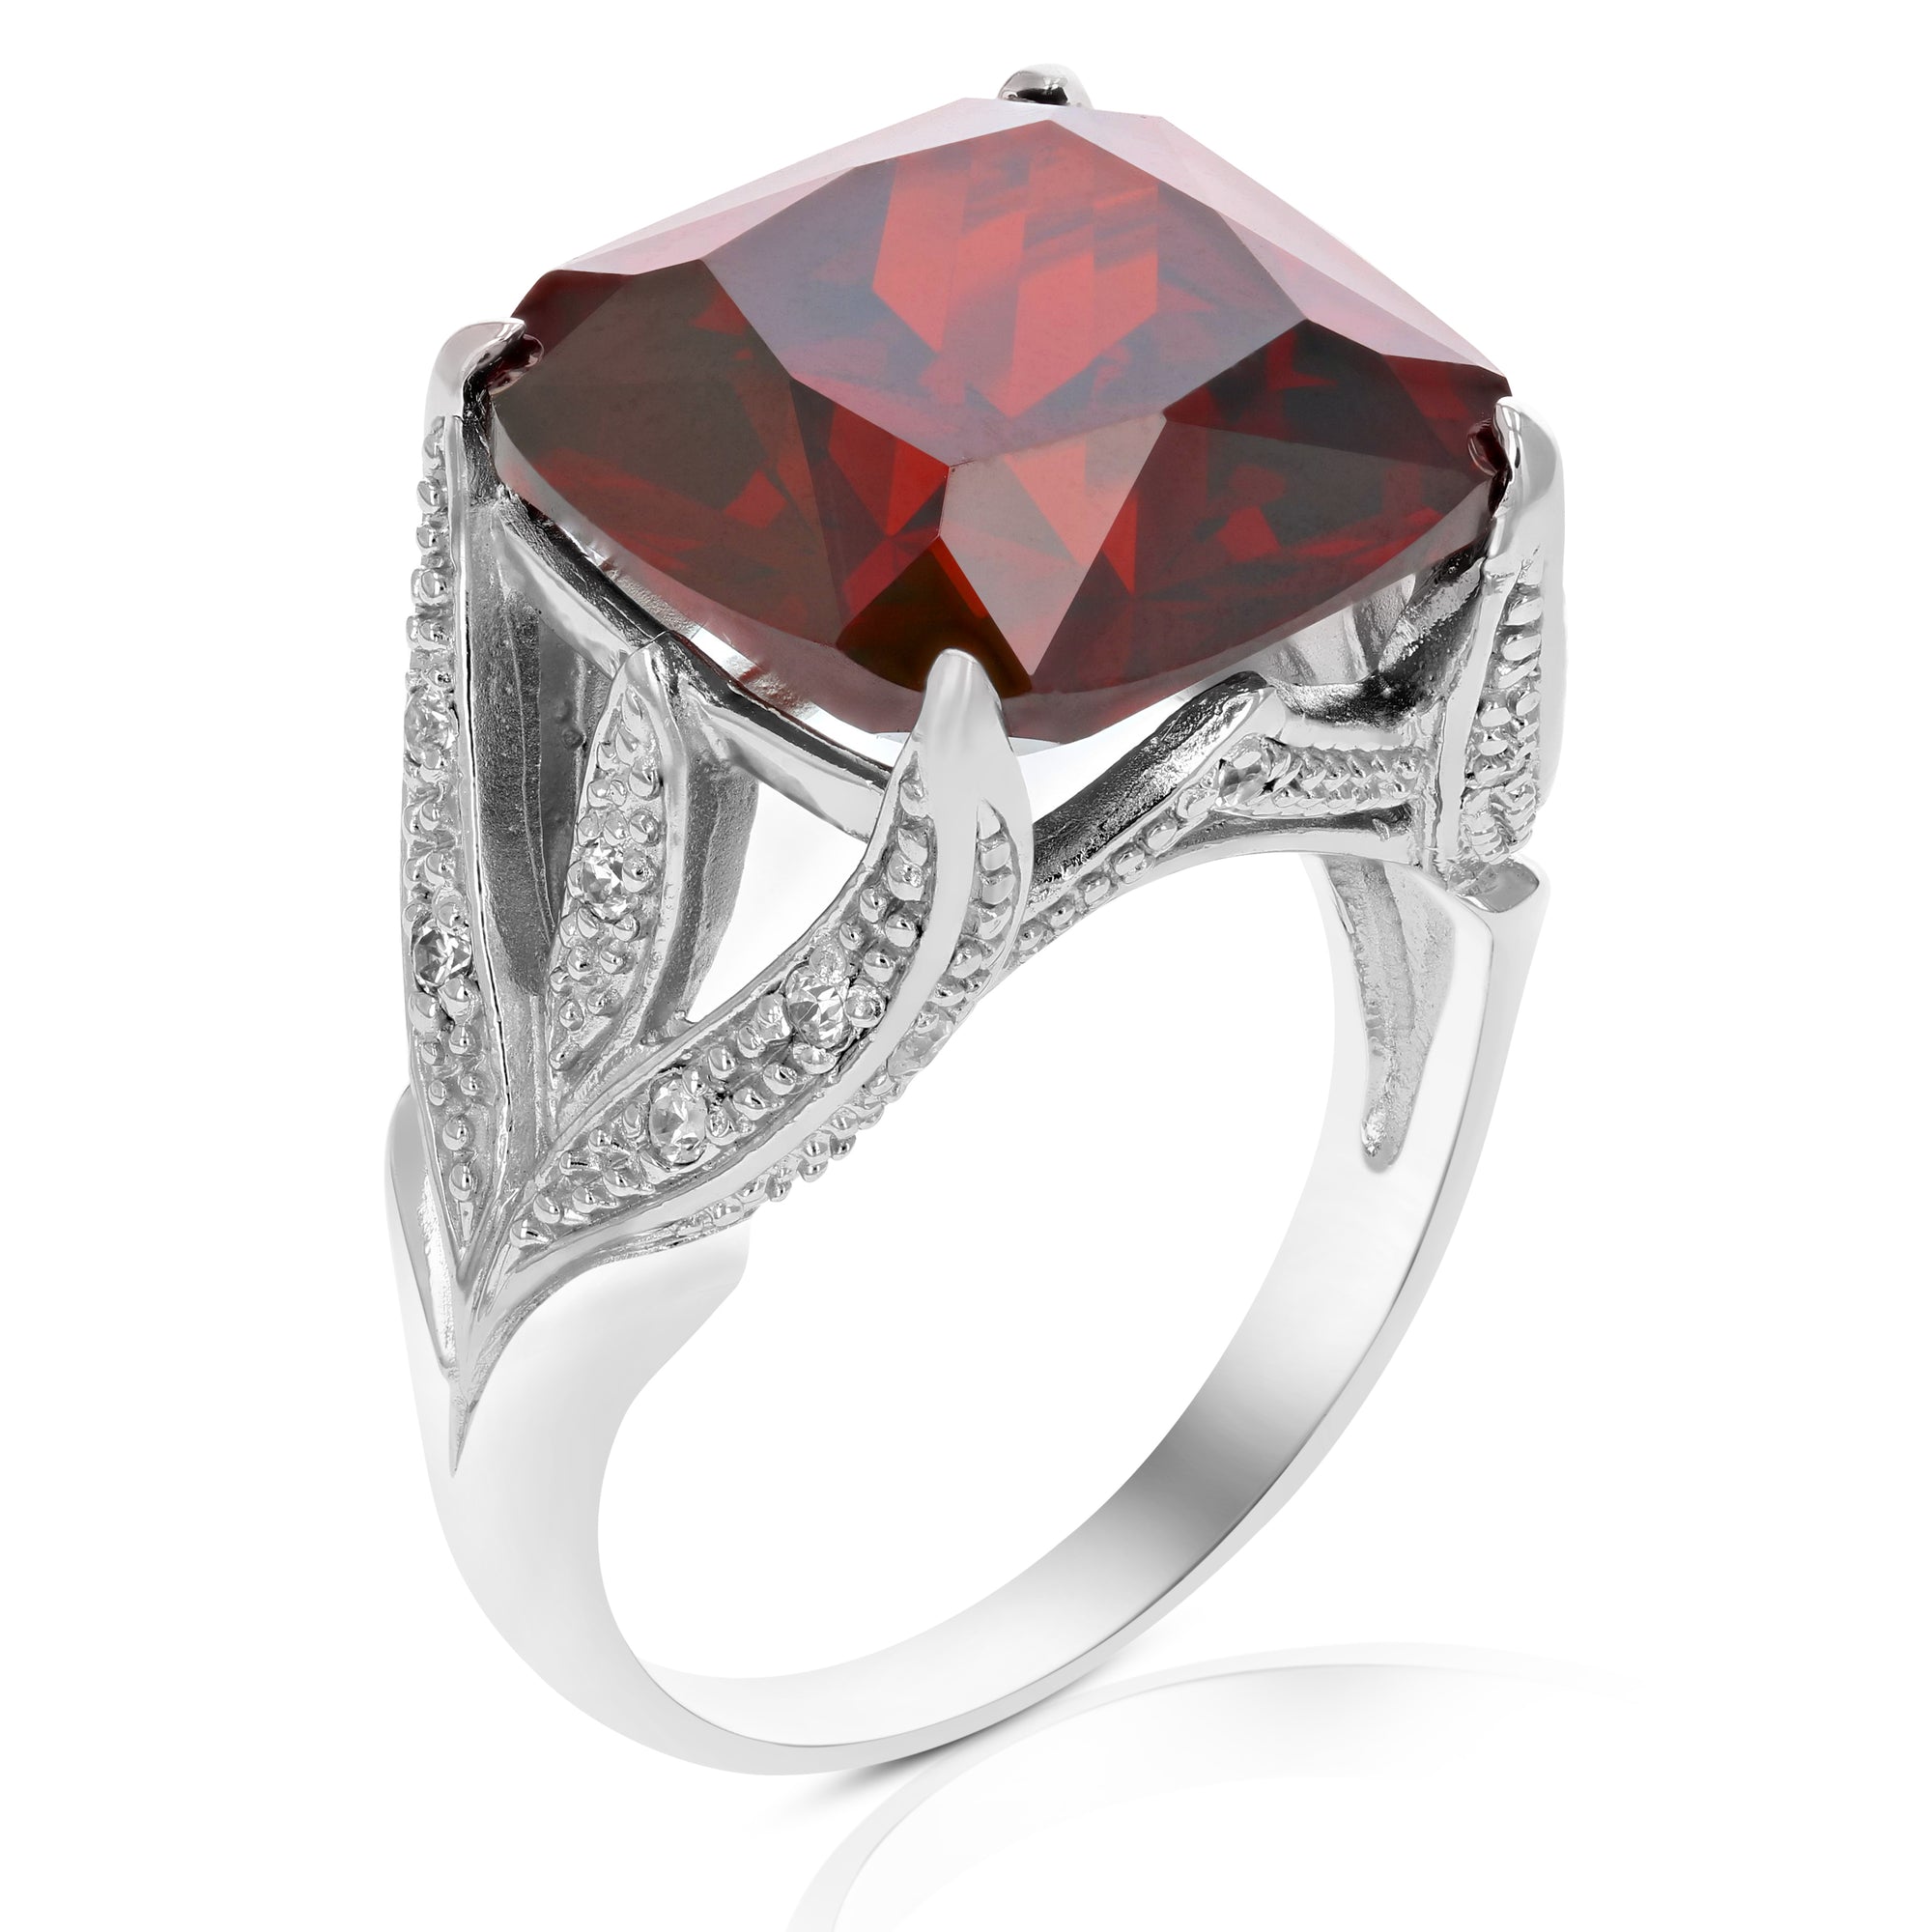 14 MM Red Cubic Zirconia Ring .925 Sterling Silver with Rhodium Plating Cushion Size 7